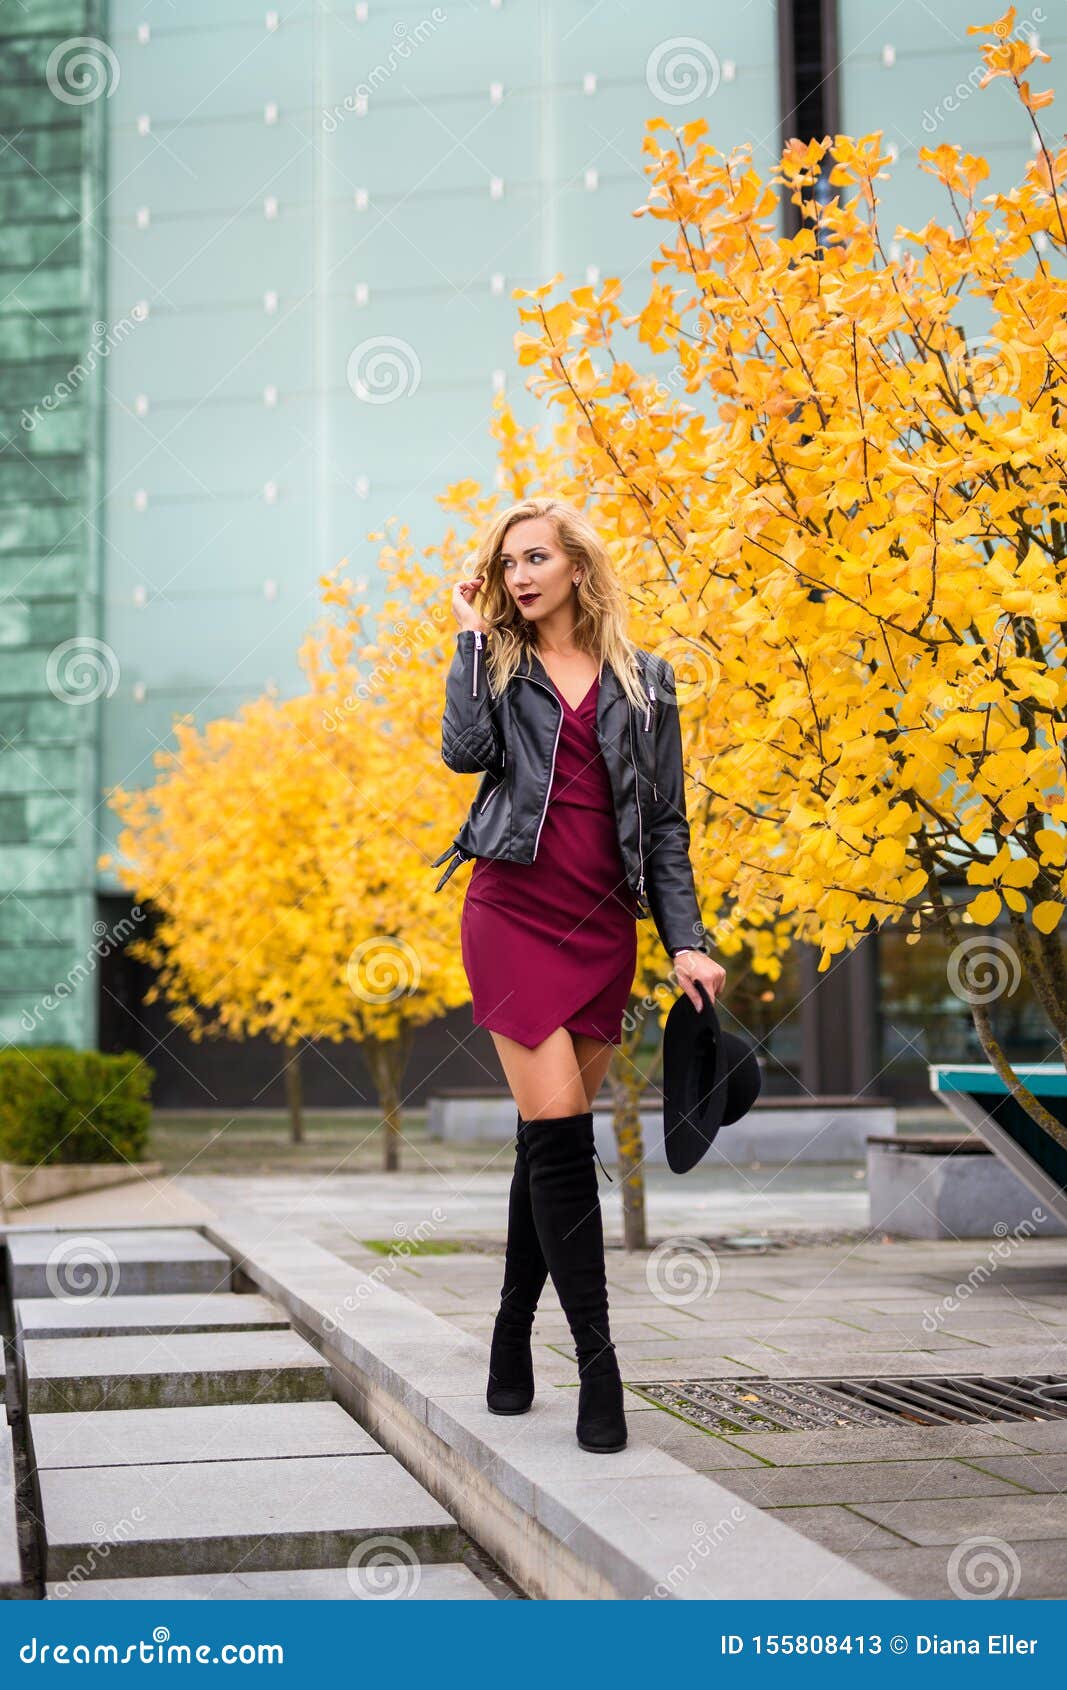 Young Beautiful Blond Woman Walking in Autumn City Stock Image - Image ...